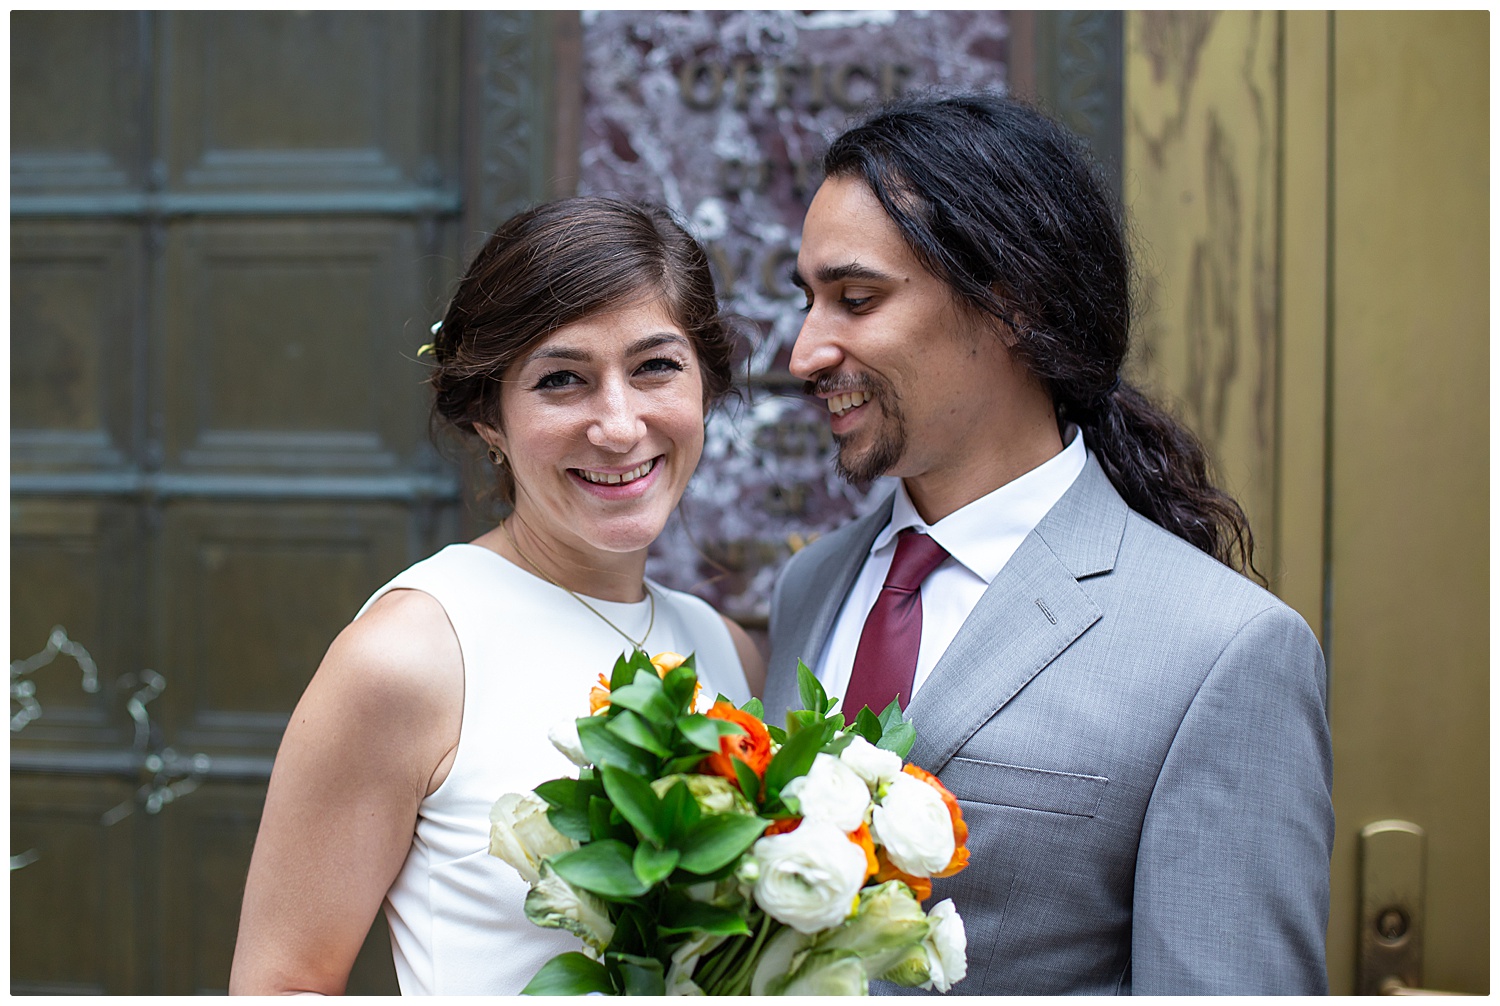 Kate-Alison-Photography-NYC-City-Hall-Courthouse-Elopement_0017.jpg